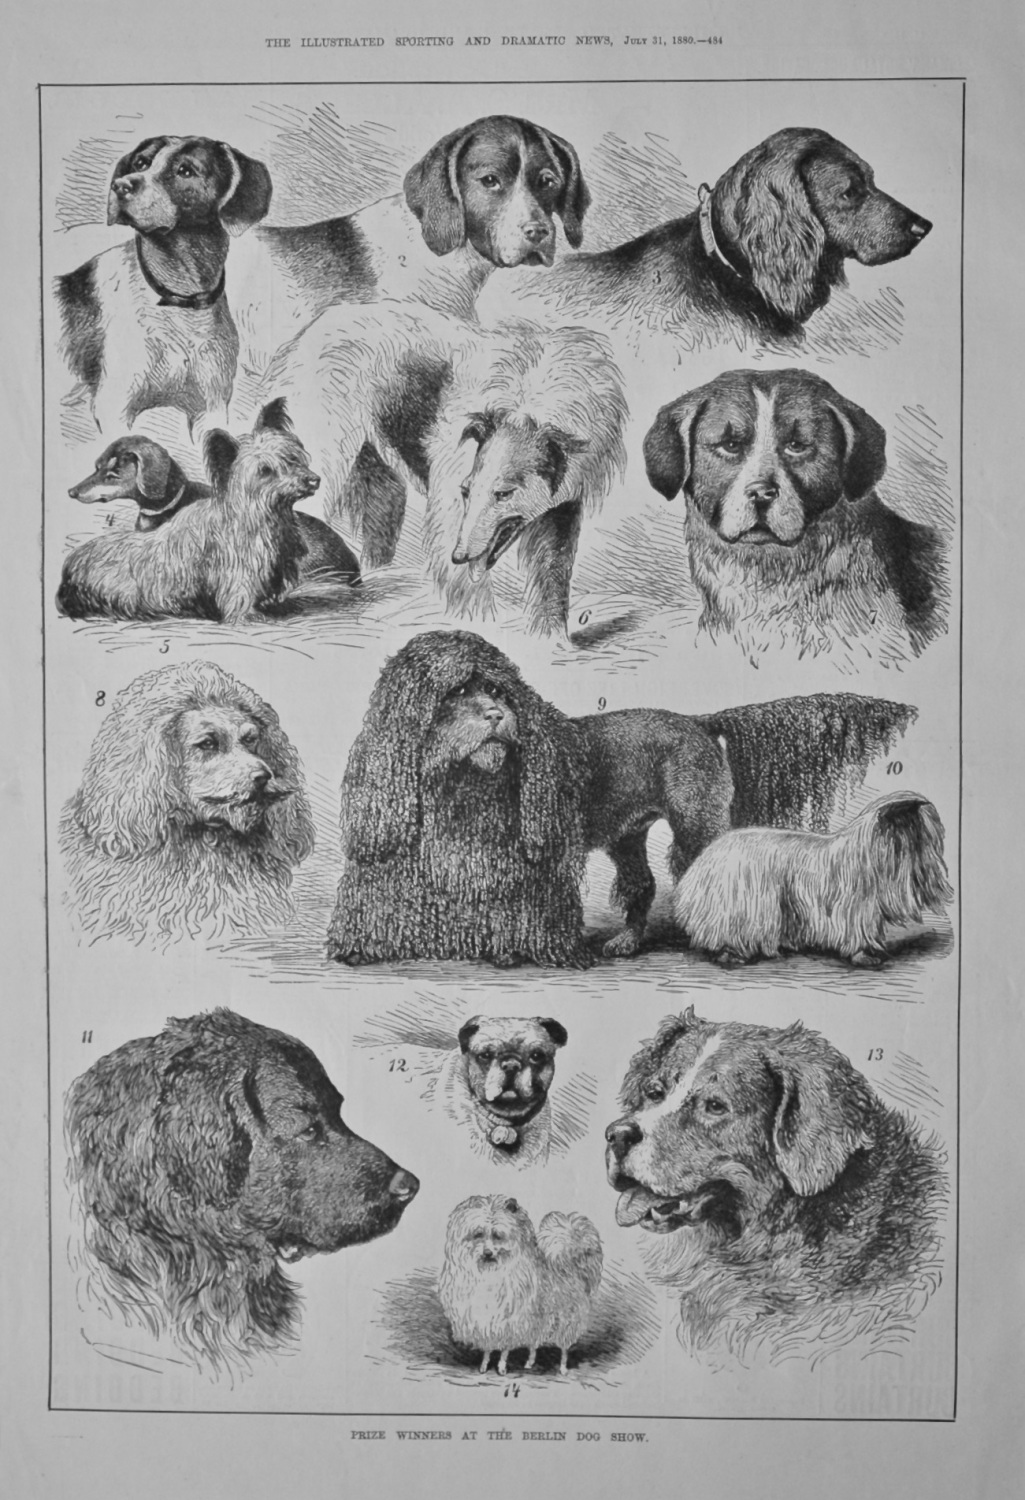 Prize Winners at the Berlin Dog Show.  1880.